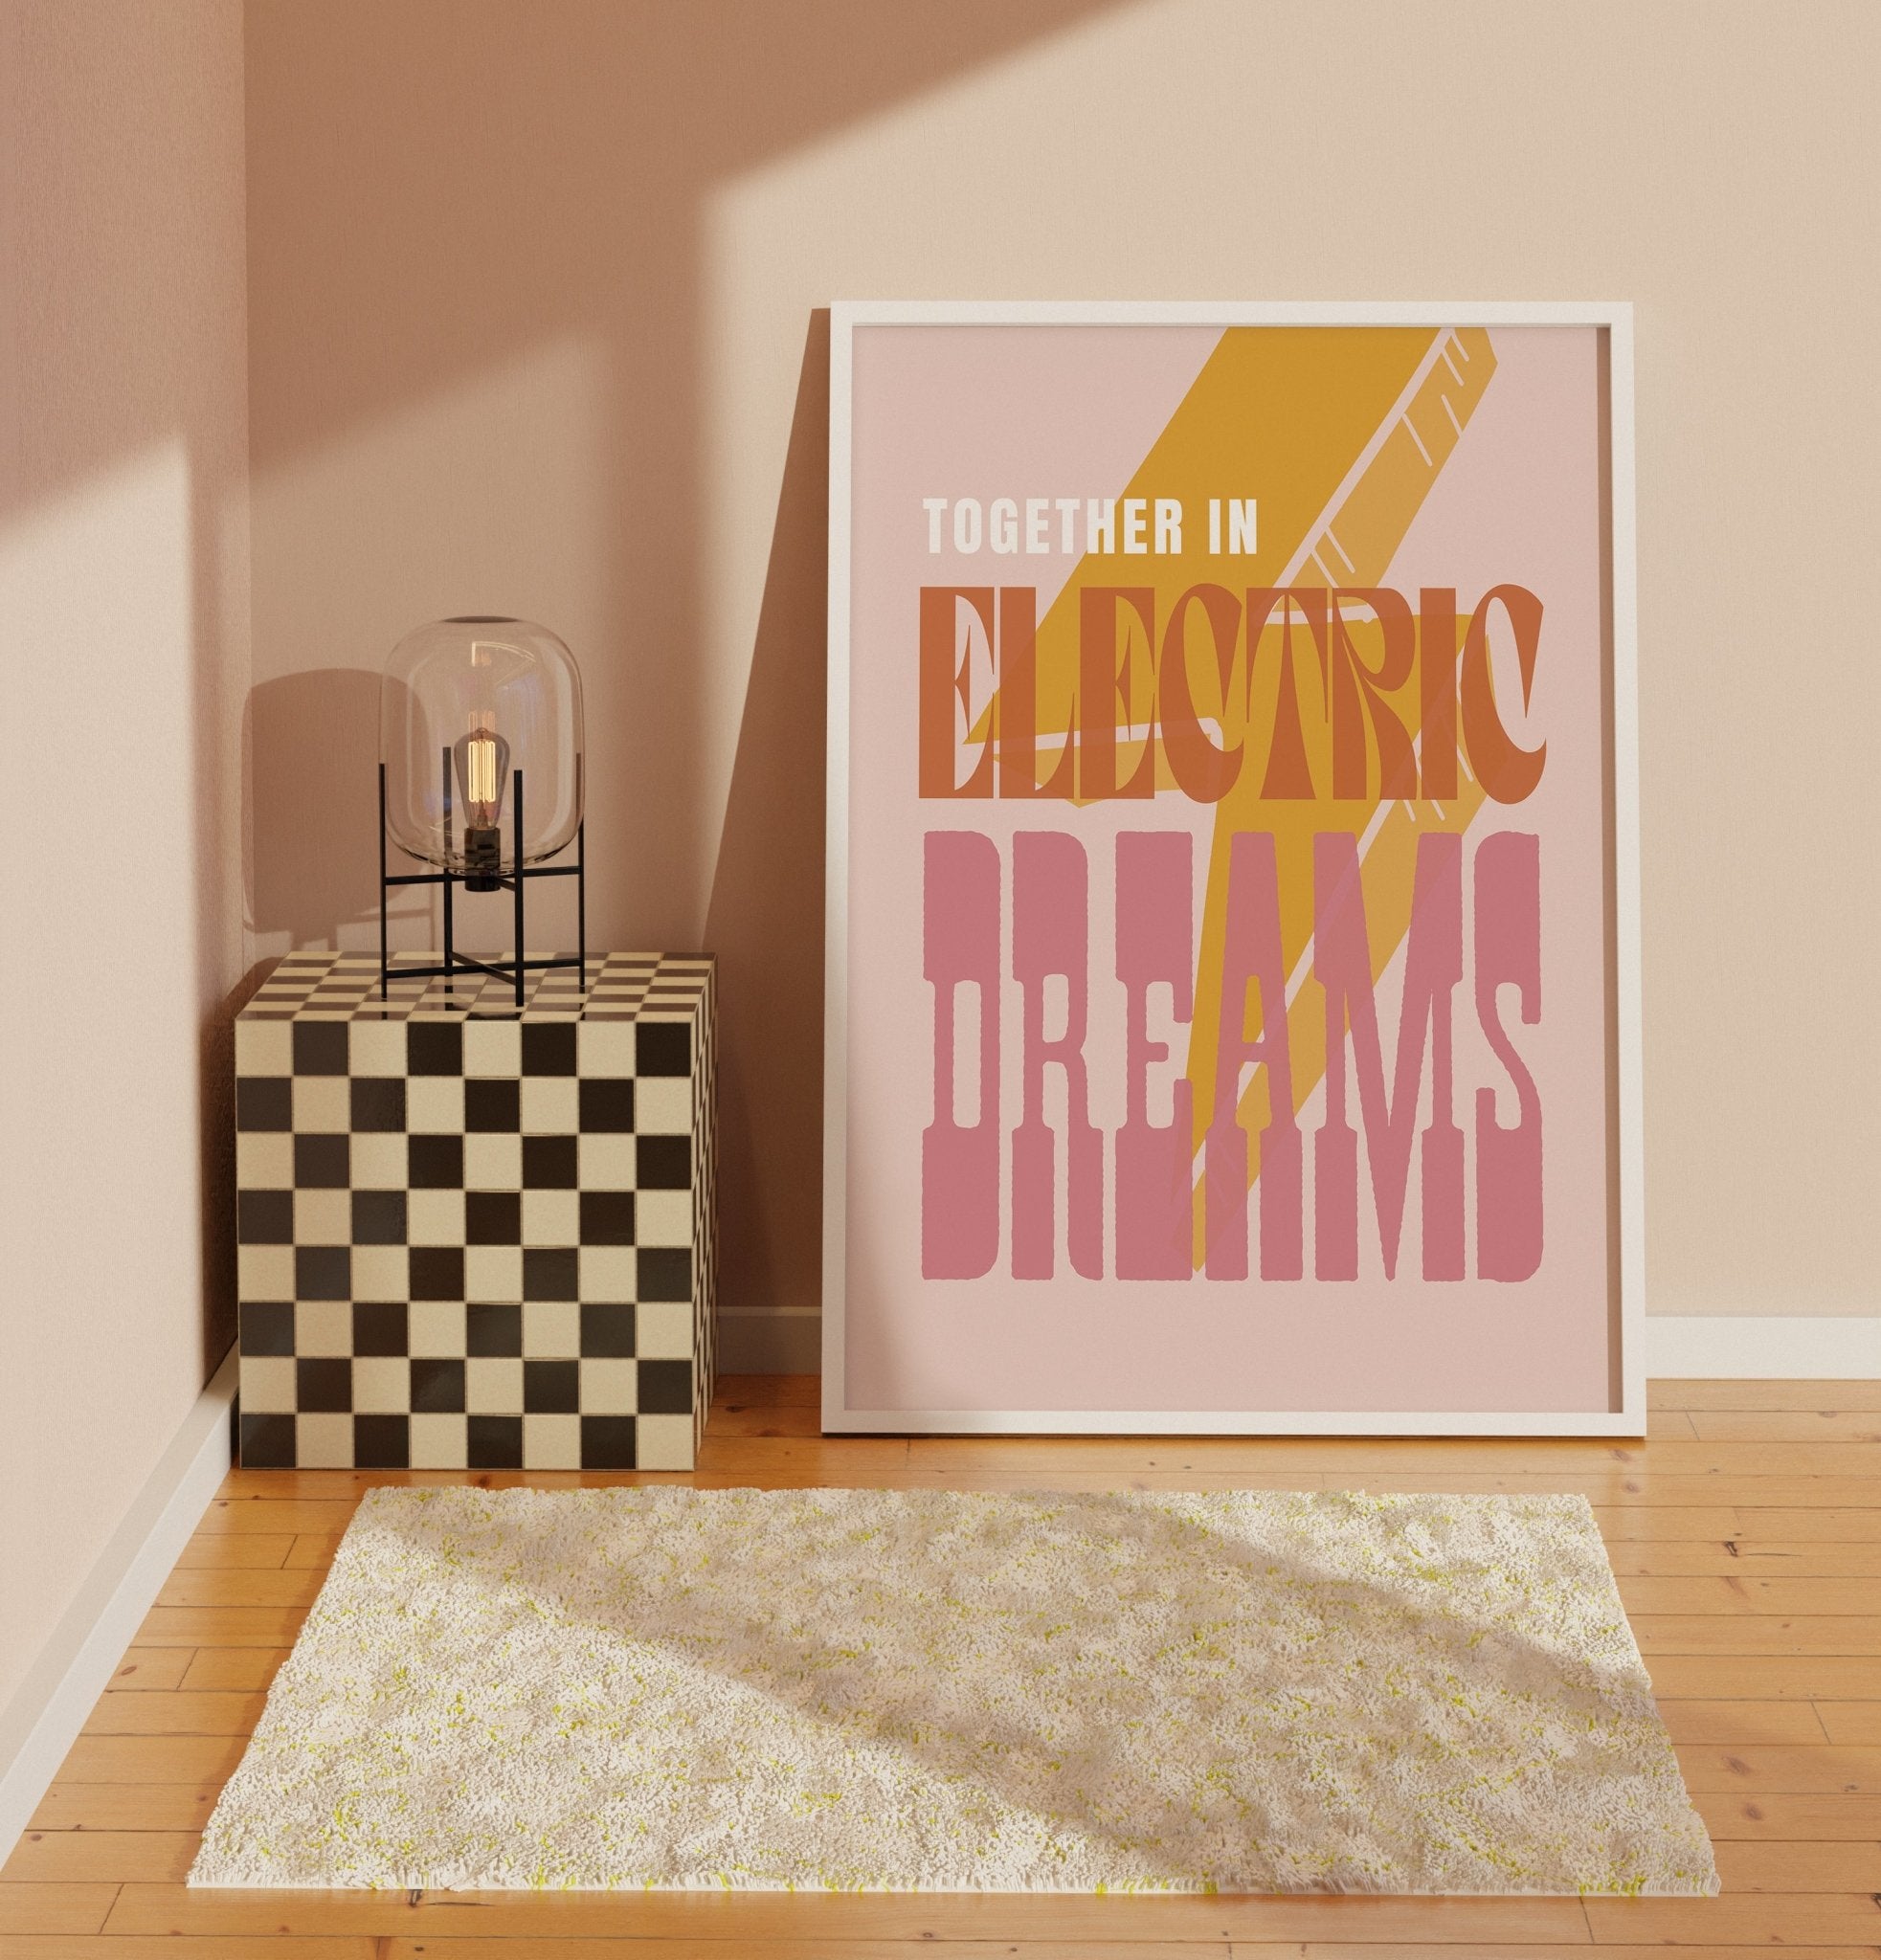 Electric Dreams Poster